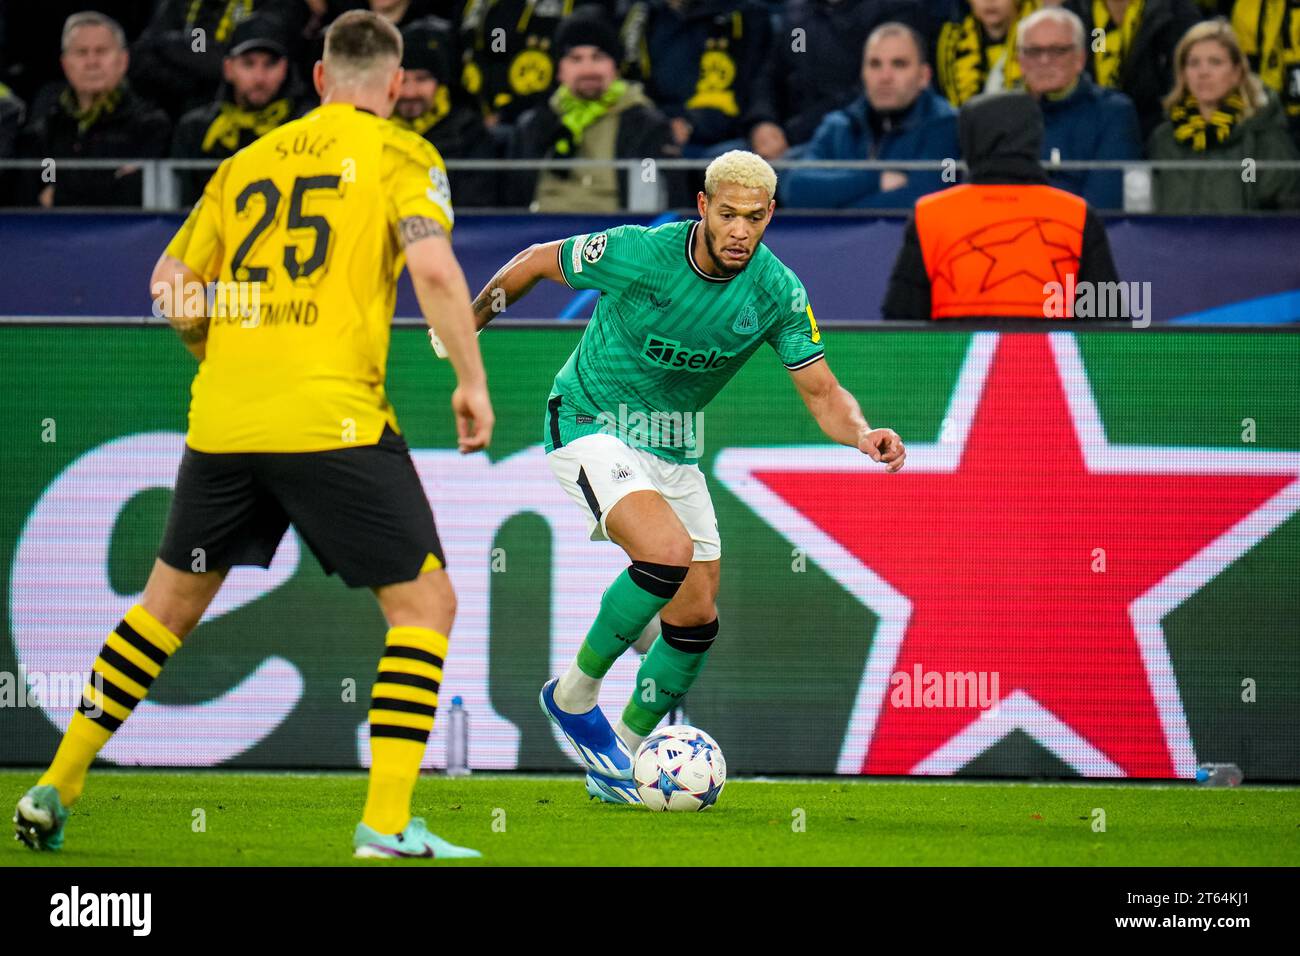 Dortmund, Germany. 07th Nov, 2023. DORTMUND, GERMANY - NOVEMBER 7: Joelinton of Newcastle United dribbles with the ball towards Niklas Sule of Borussia Dortmund during the UEFA Champions League Group F match between Borussia Dortmund and Newcastle United FC at the Signal Iduna Park on November 7, 2023 in Dortmund, Germany (Photo by Rene Nijhuis/BSR Agency) Credit: BSR Agency/Alamy Live News Stock Photo